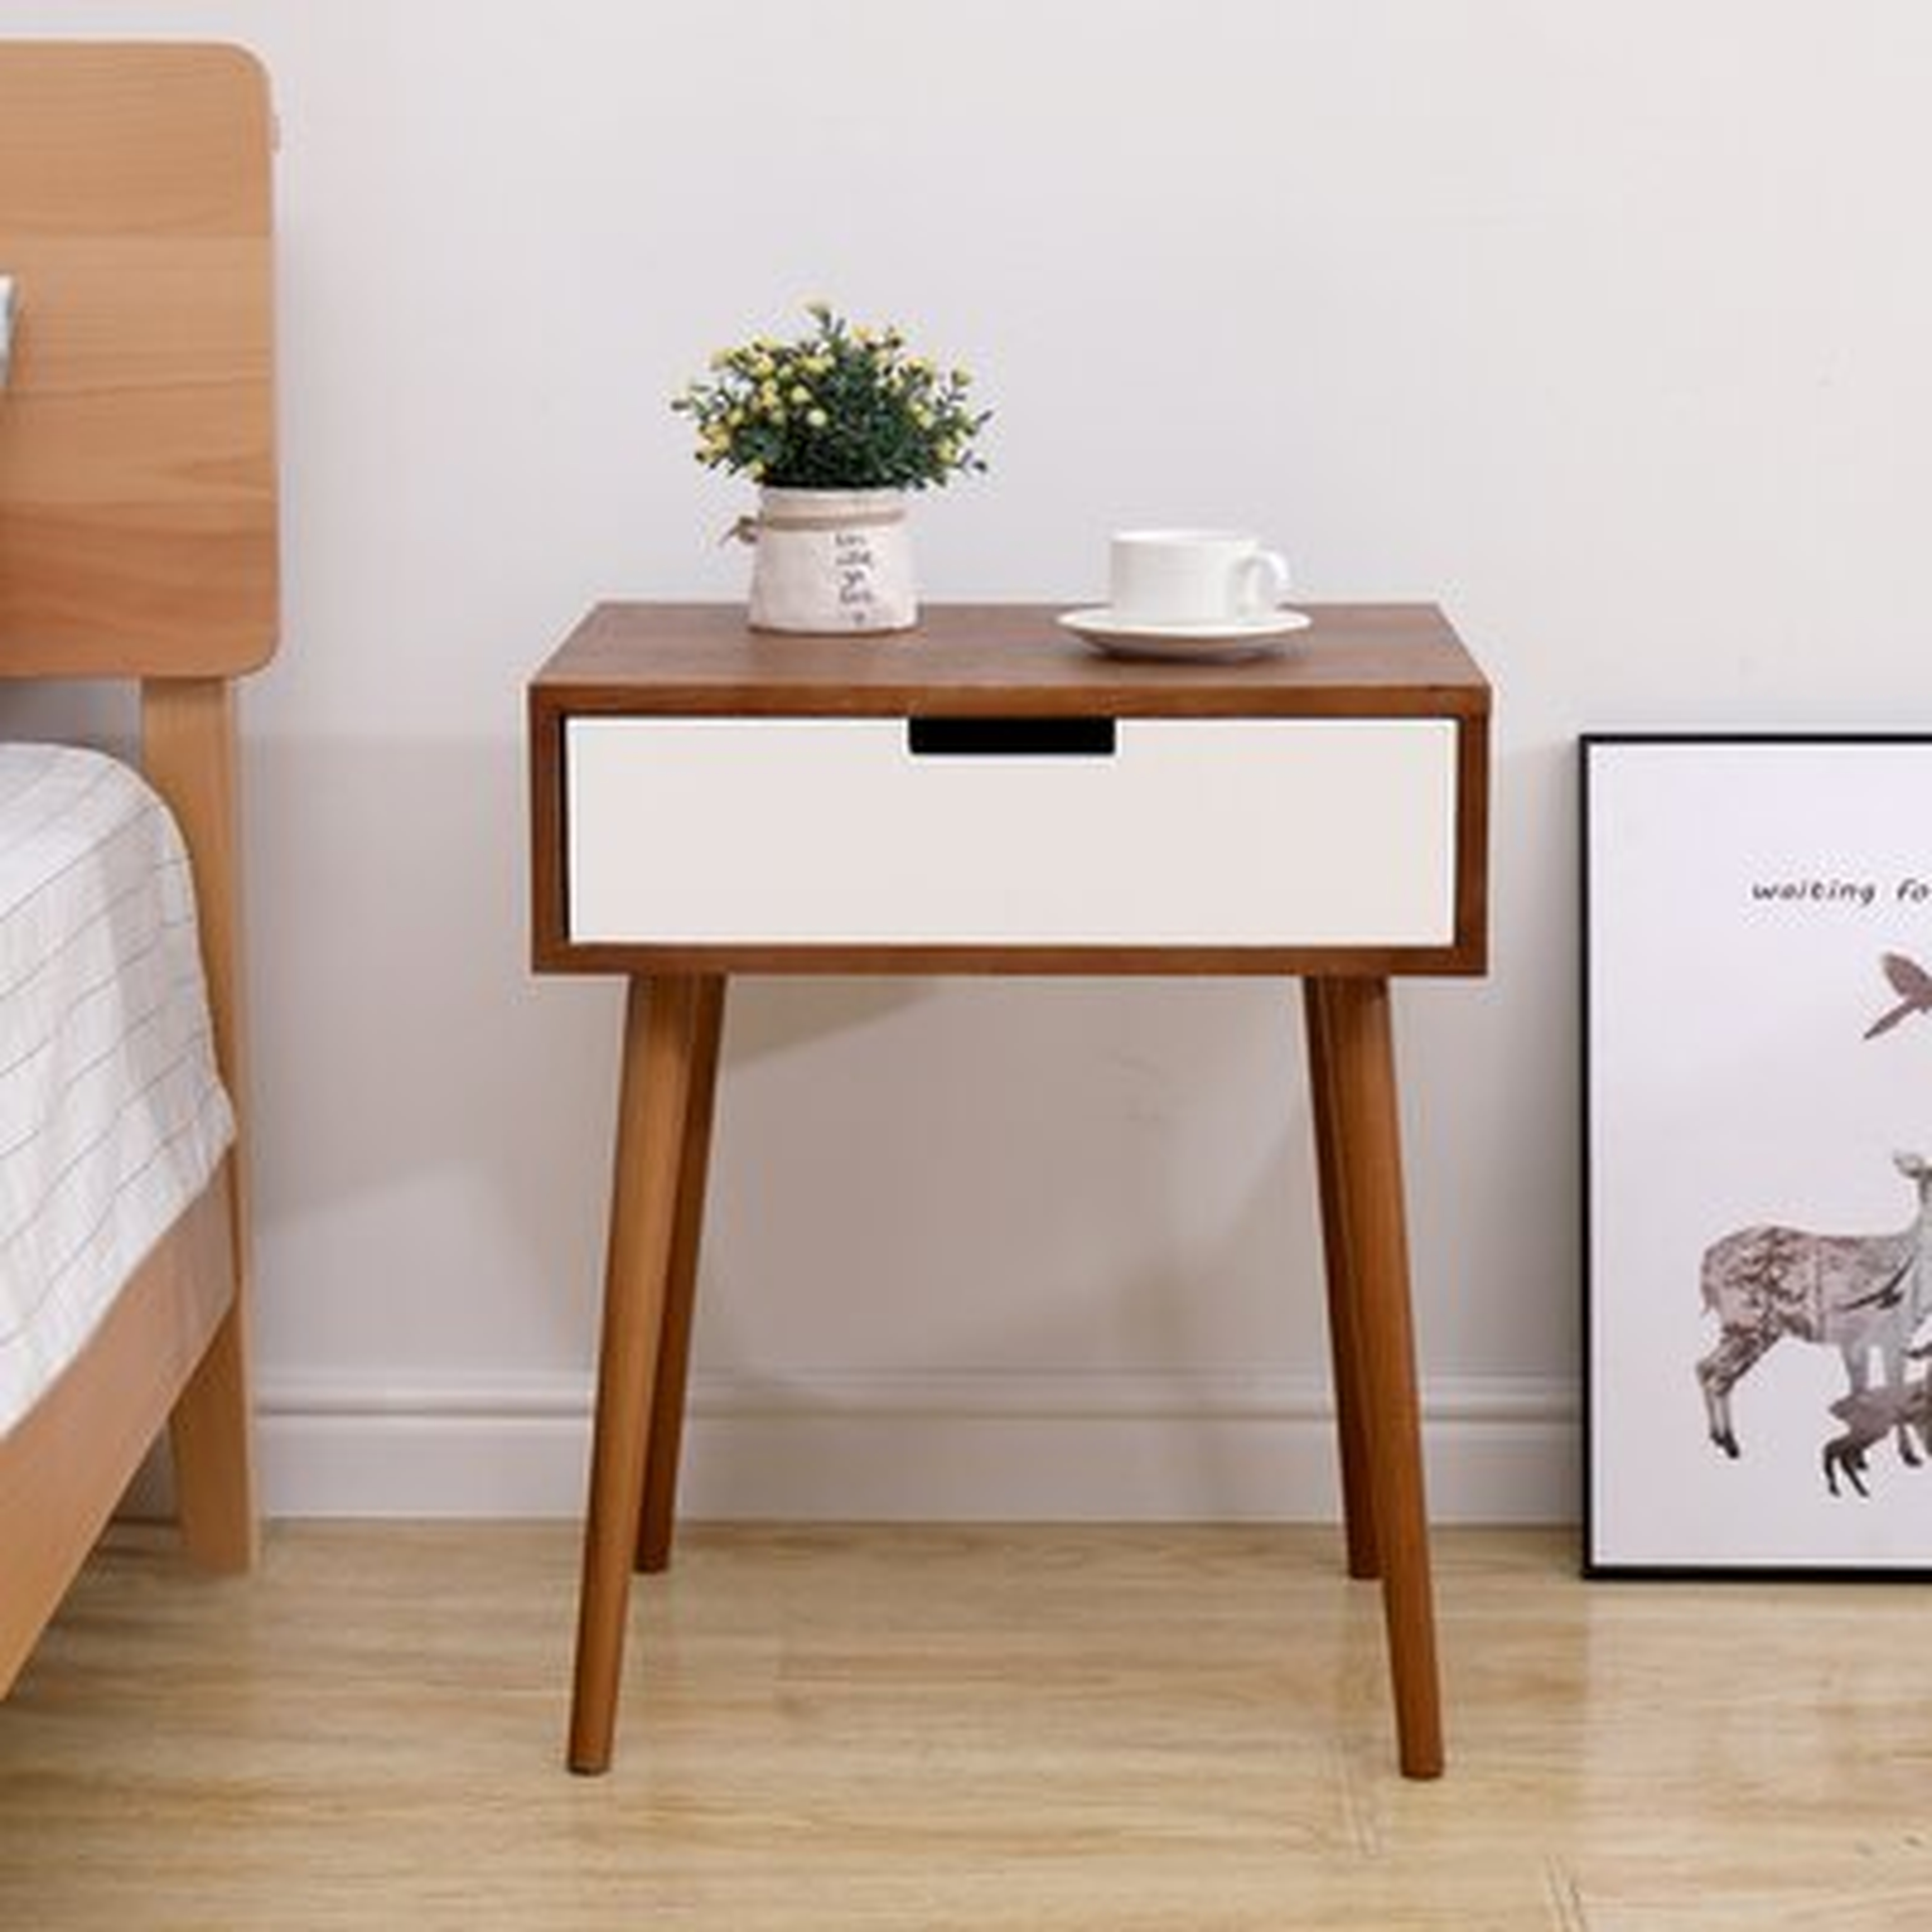 Light Fraxinus Mandshurica/White Side End Table Nightstand With Drawer 22.5" H - Wayfair